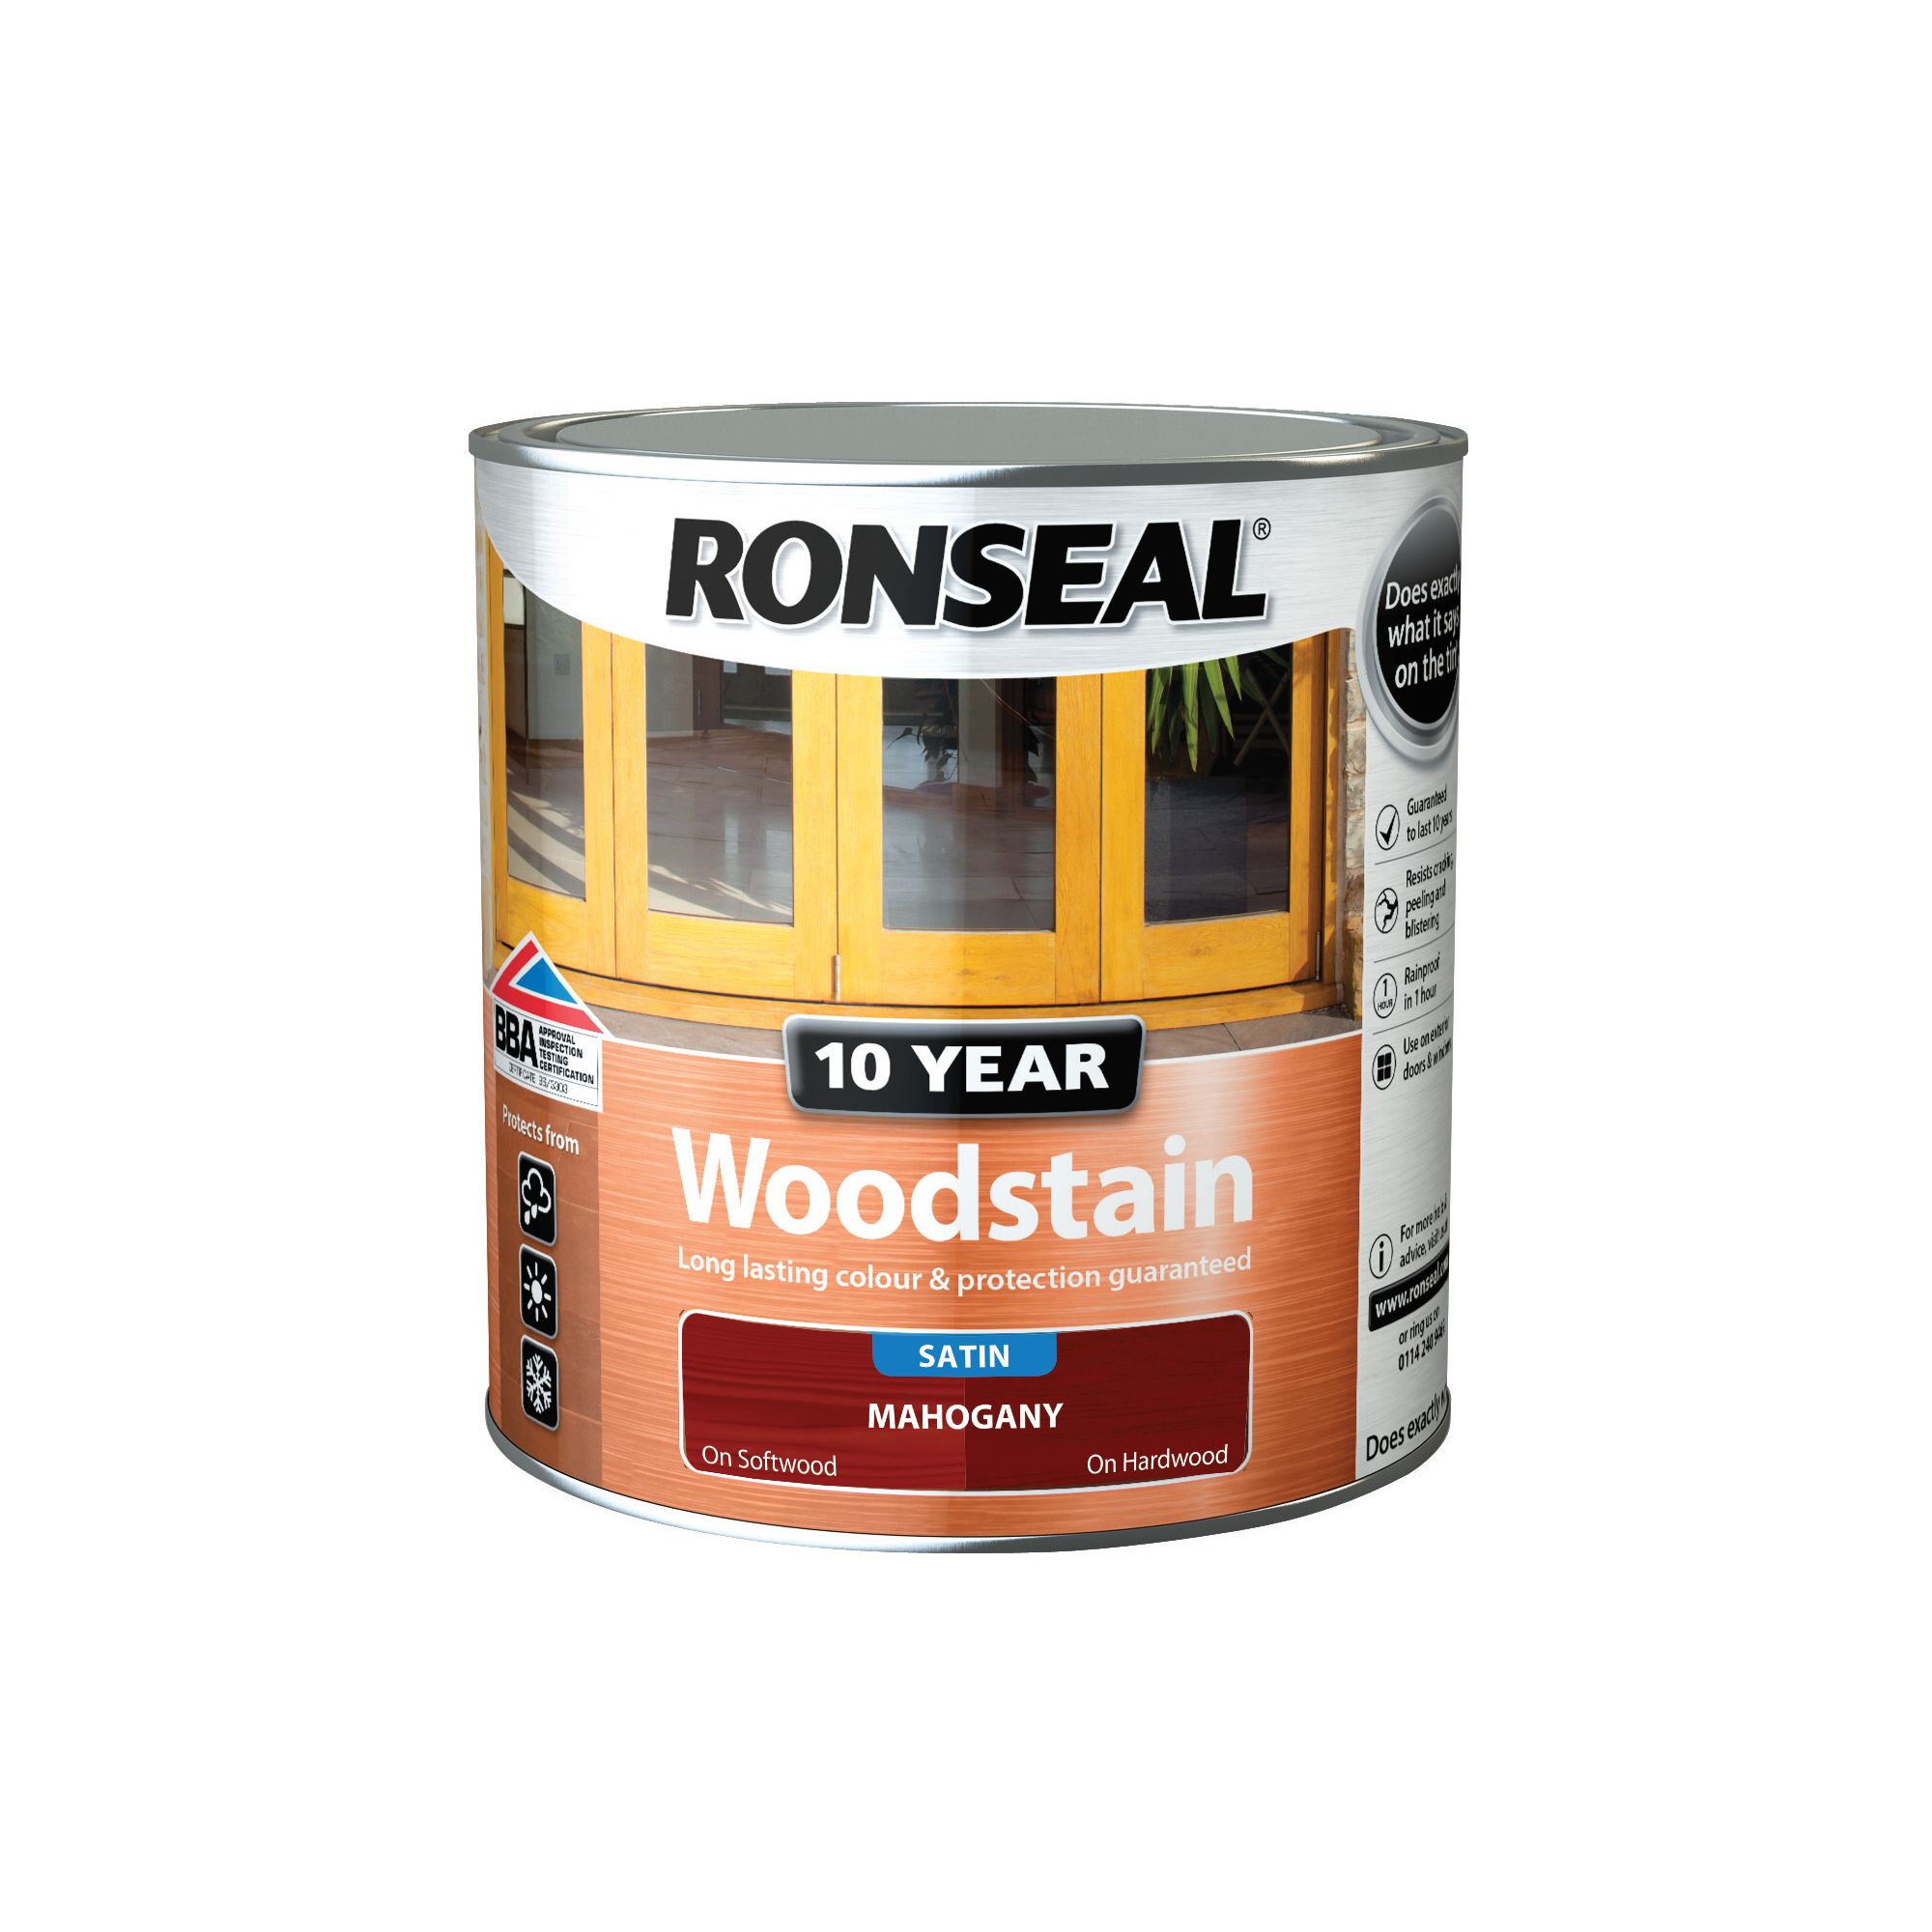 Ronseal 10 Year Mahogany Satin Quick dry Doors & window frames Wood stain,  250ml